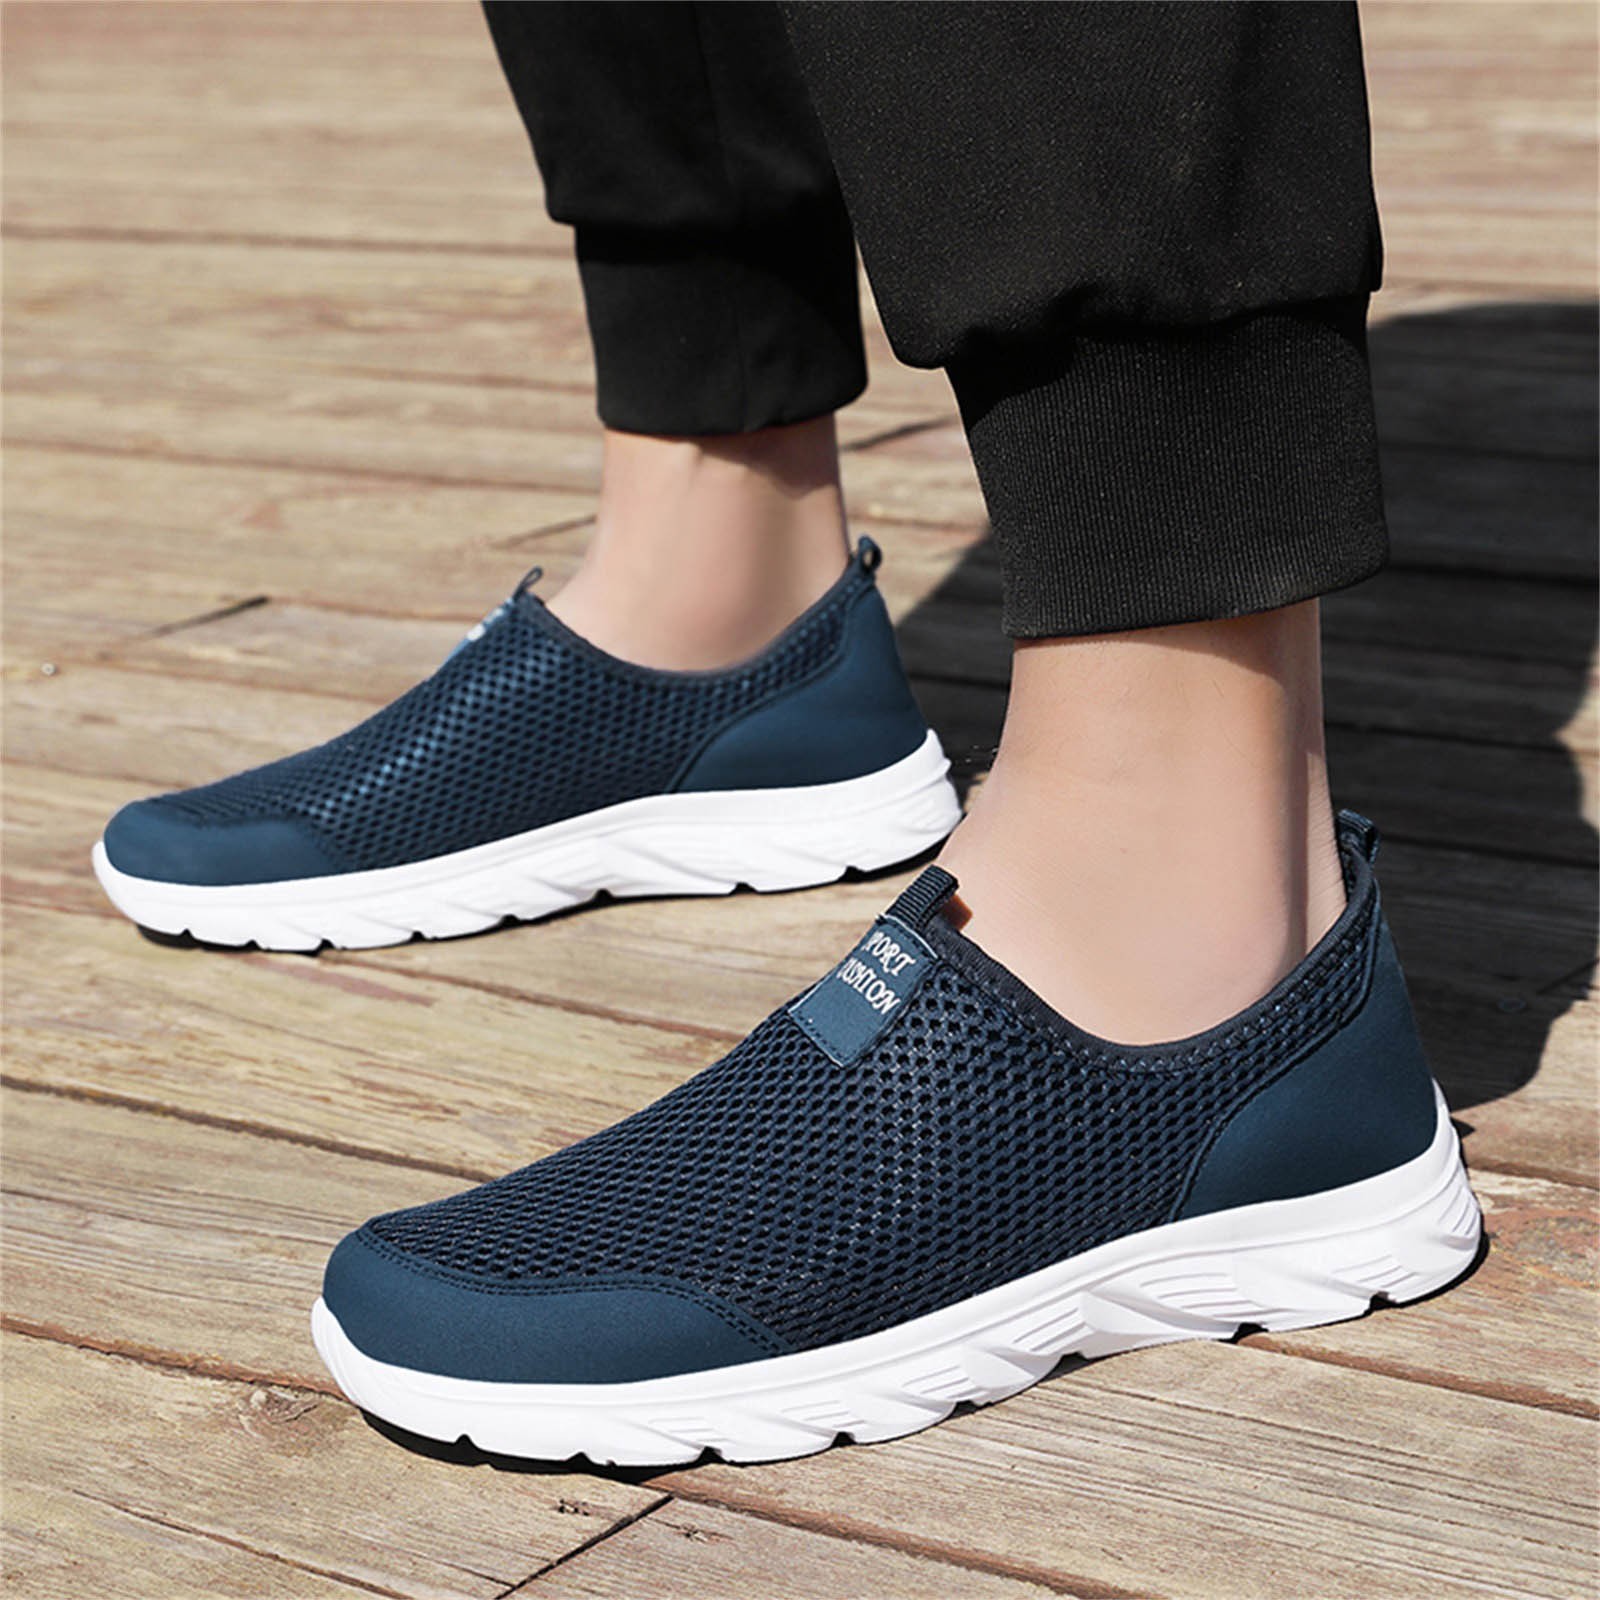 CBGELRT Shoes for Men Casual Men's Sneakers Men's Tennis Shoes Men Shoes Summer Lightweight Breathable Casual Shoes Single Mesh Sneakers Casual Running Shoes Male Blue 42 - image 2 of 5